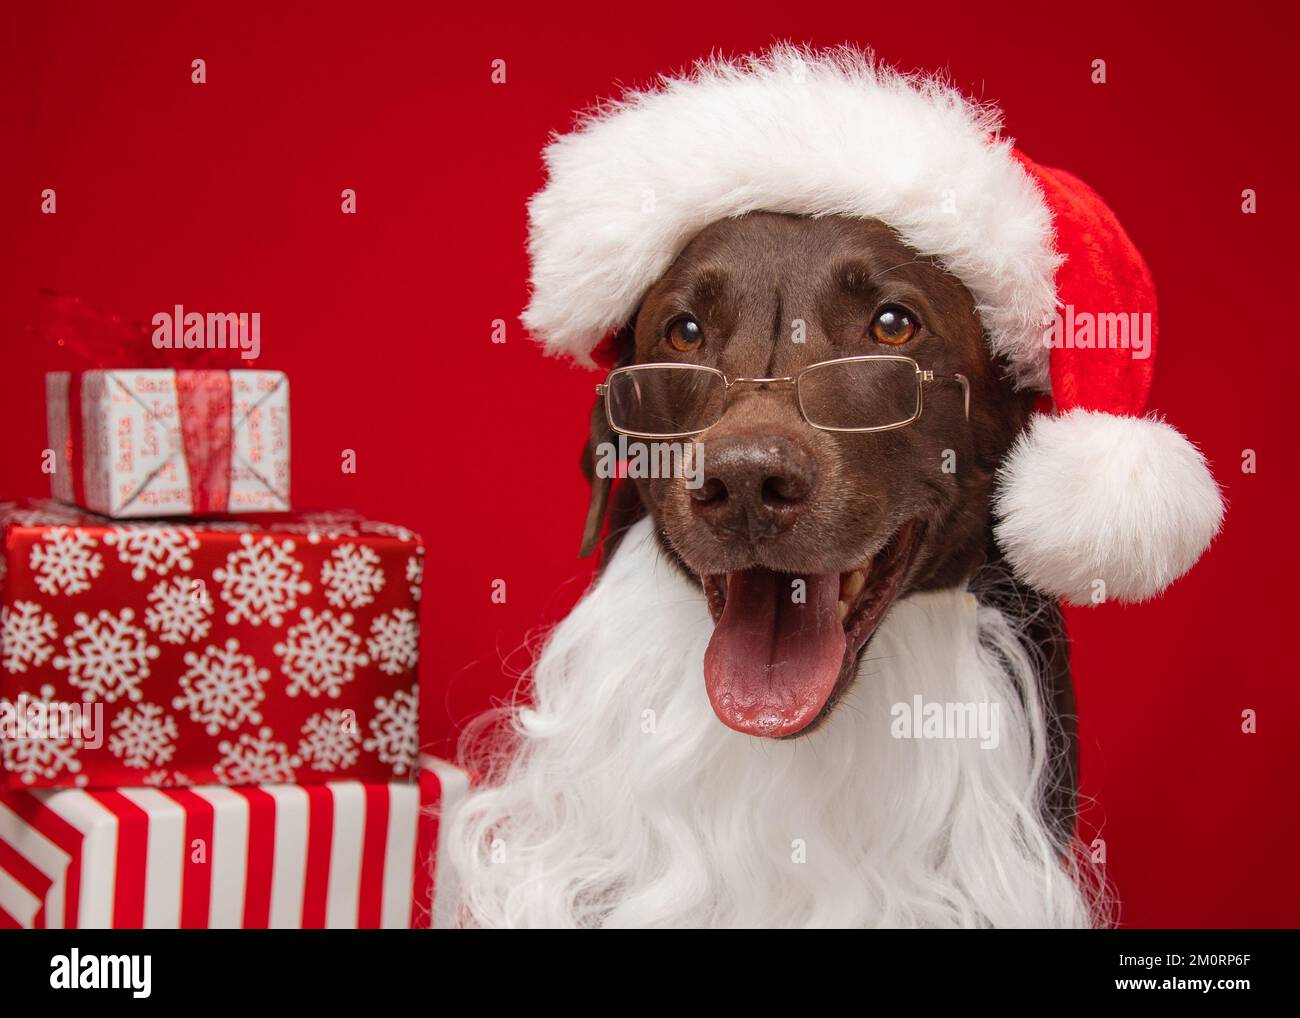 Portrait of a Chocolate Labrador retriever dressed in a santa hat, beard and glasses sitting next to a stack of Christmas gifts Stock Photo